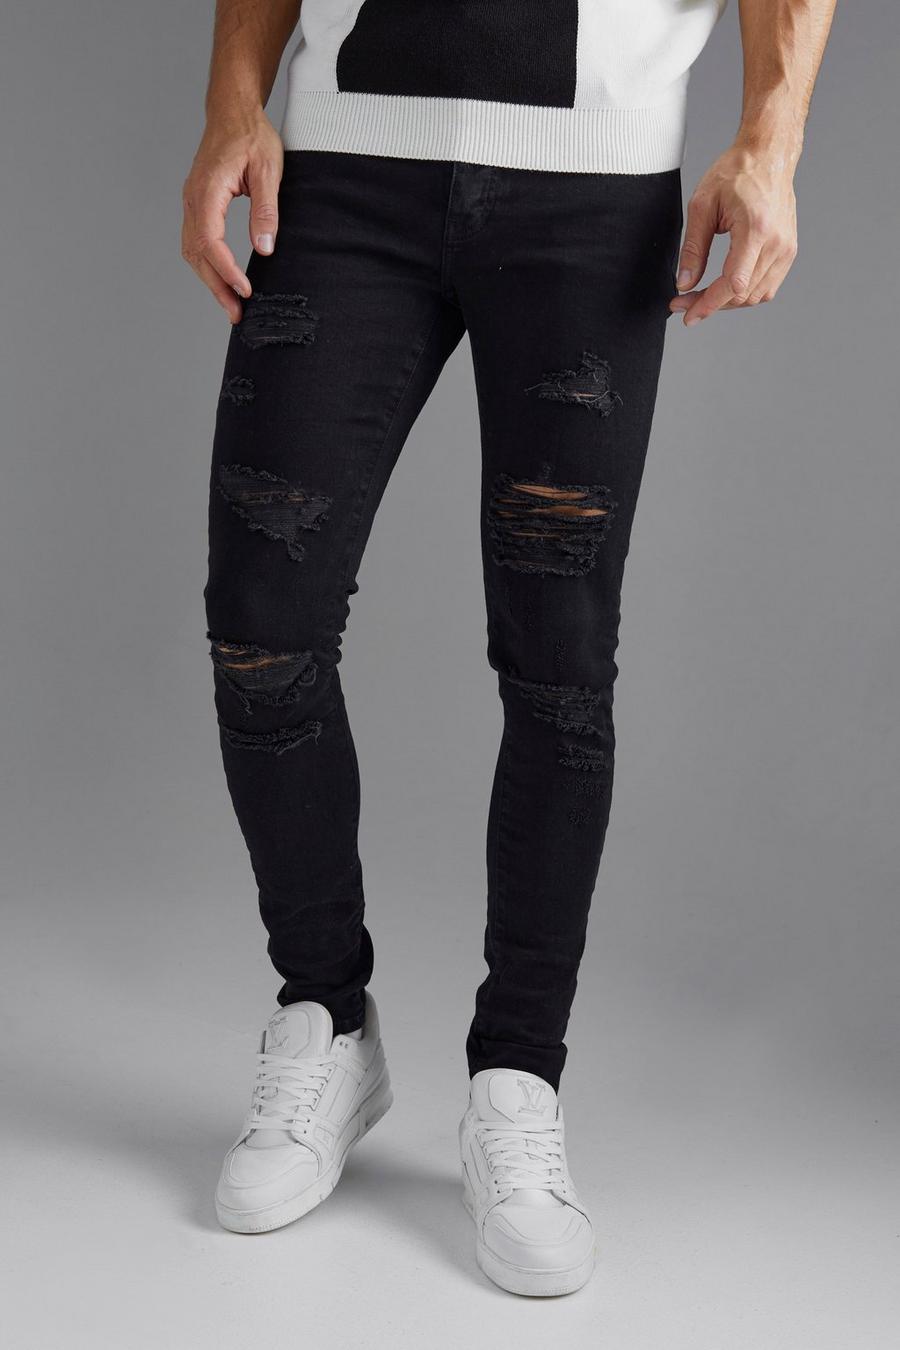 Black Tall Skinny Stretch All Over Rip Jeans Pants 